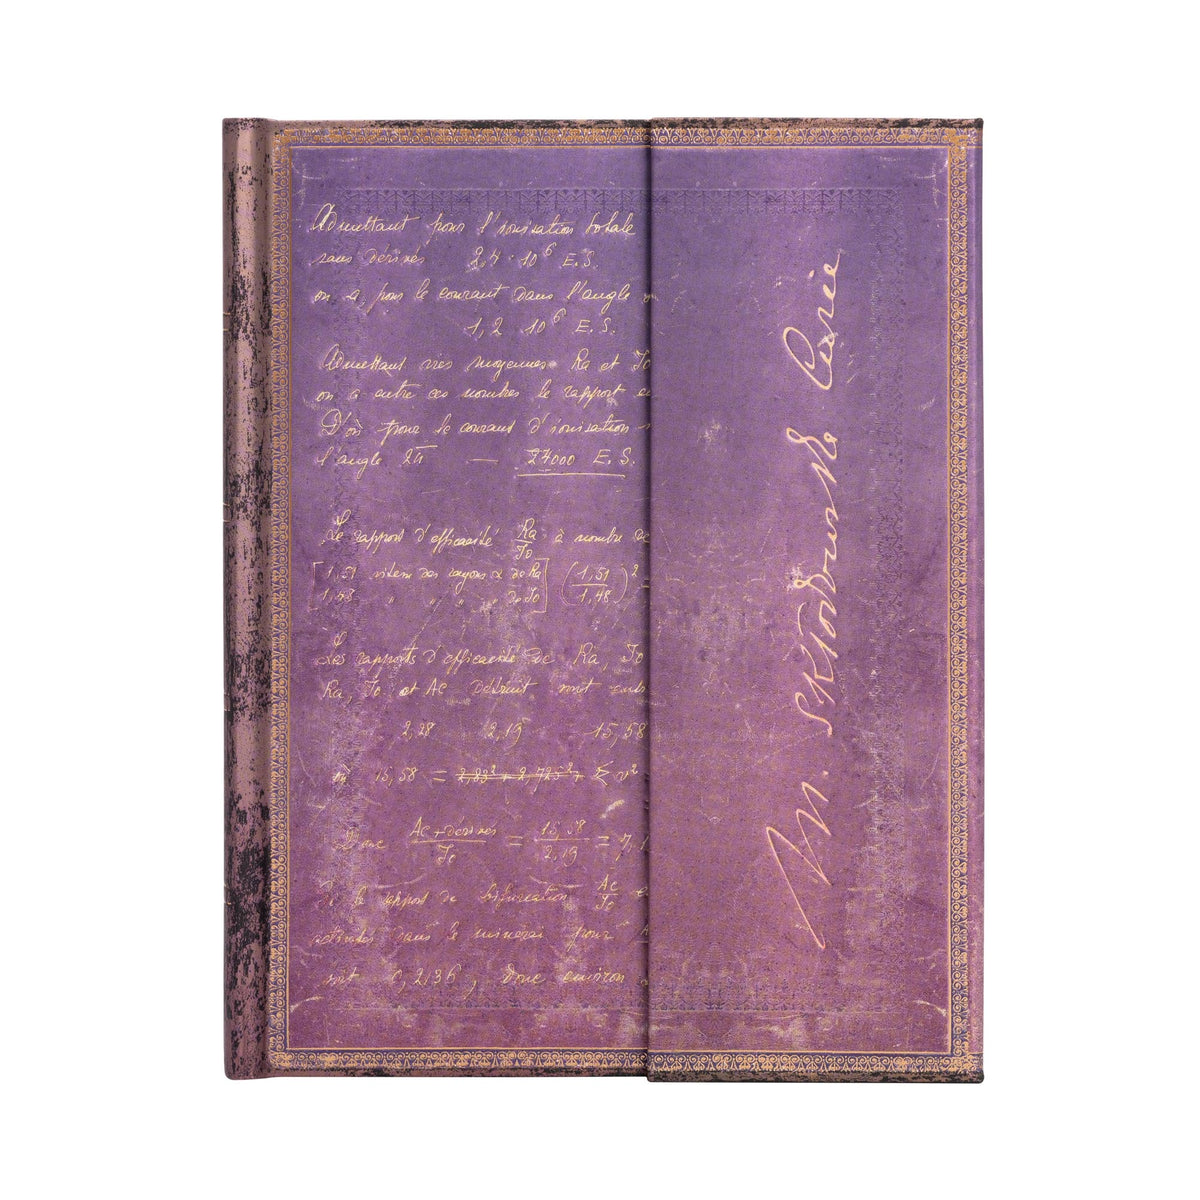 Paperblanks Embellished Manuscripts - Marie Curie, Science of Radioactivity Ultra Wrap